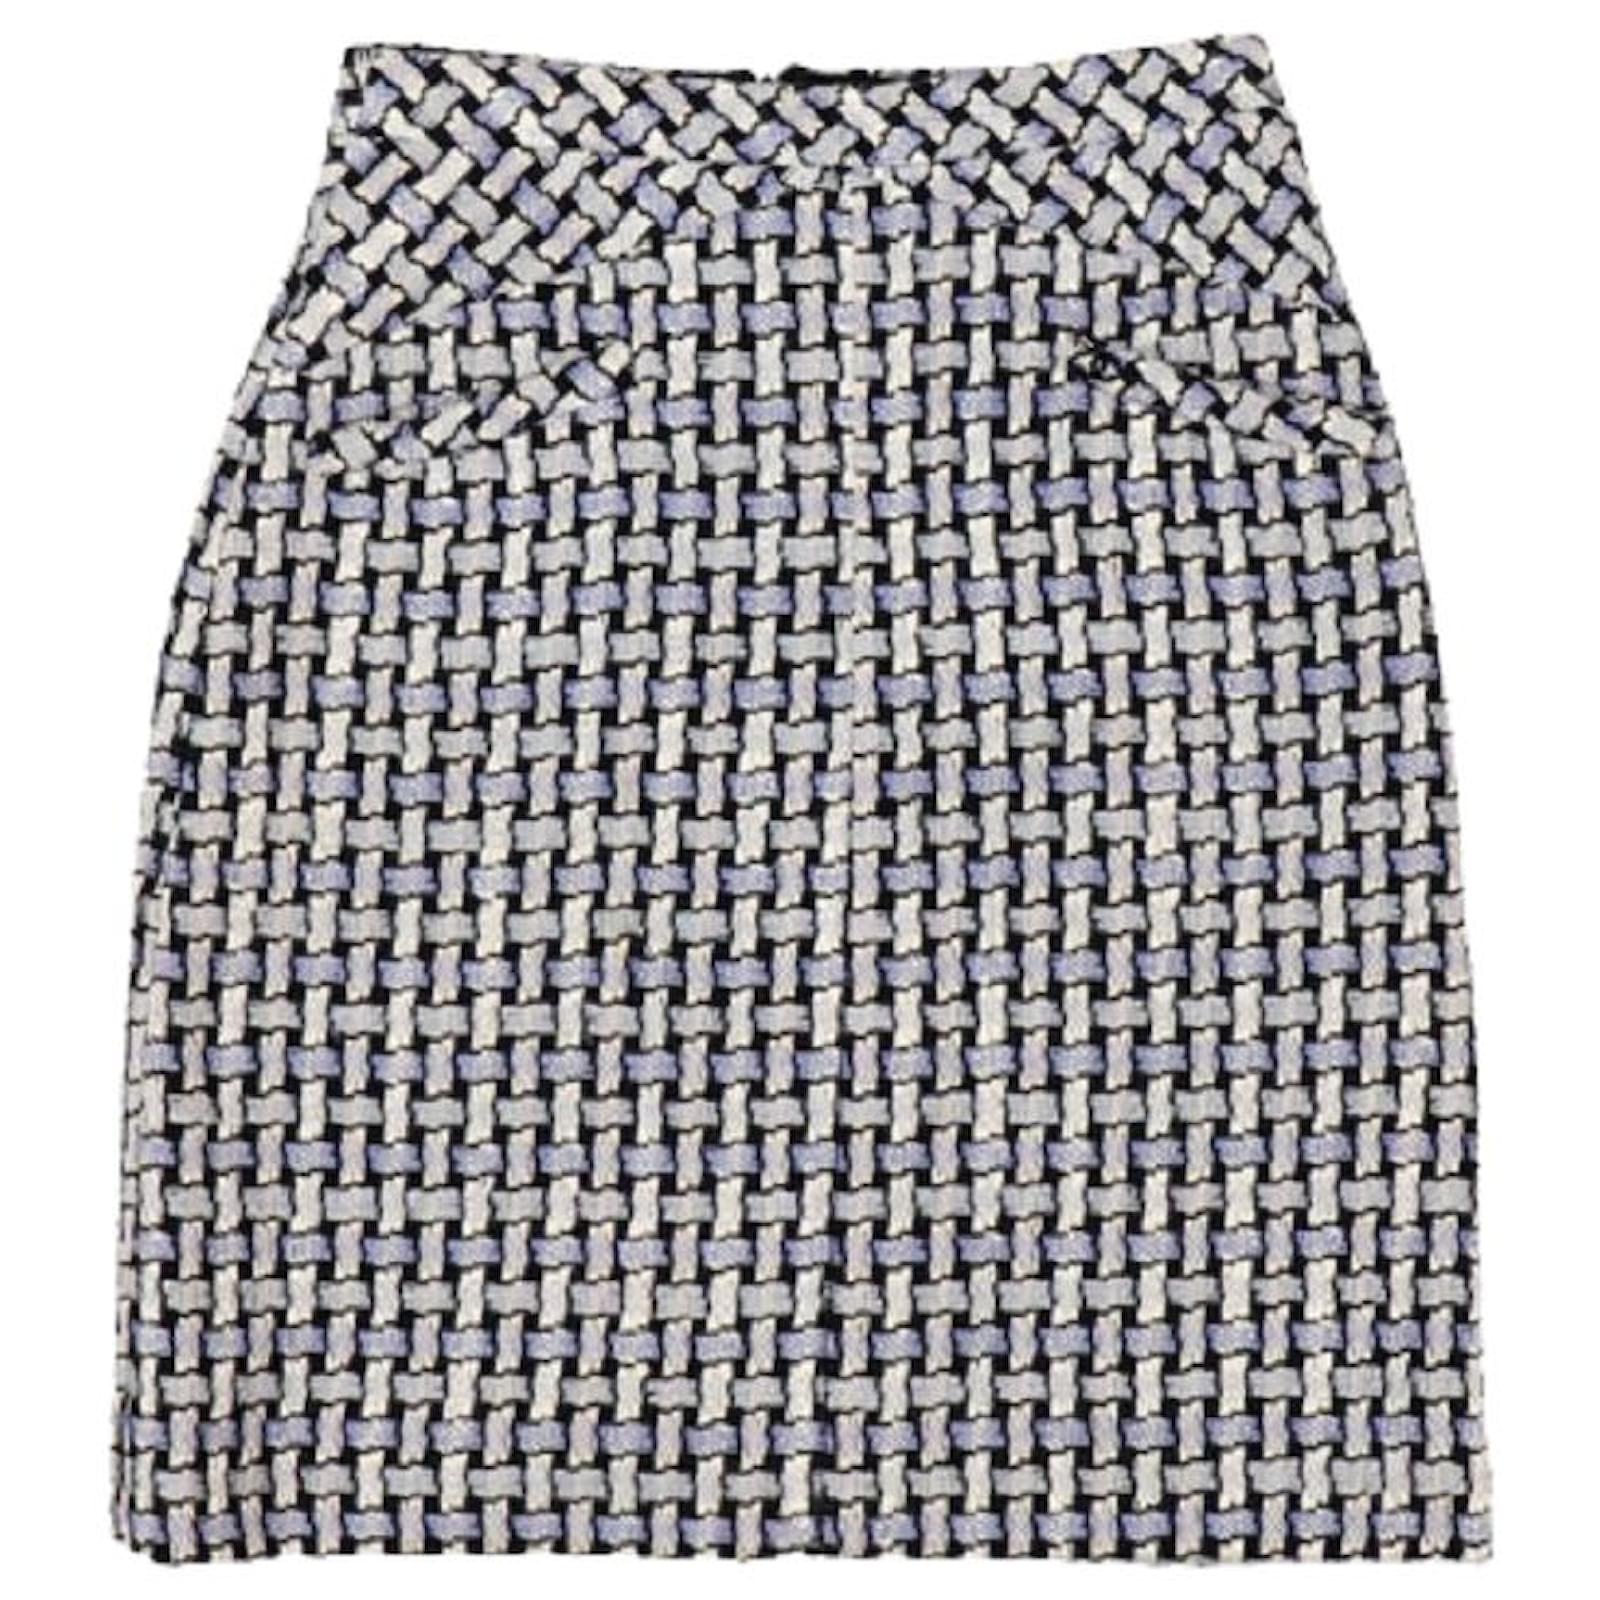 Chanel / CHANEL skirt knee length tight tweed cotton silk total